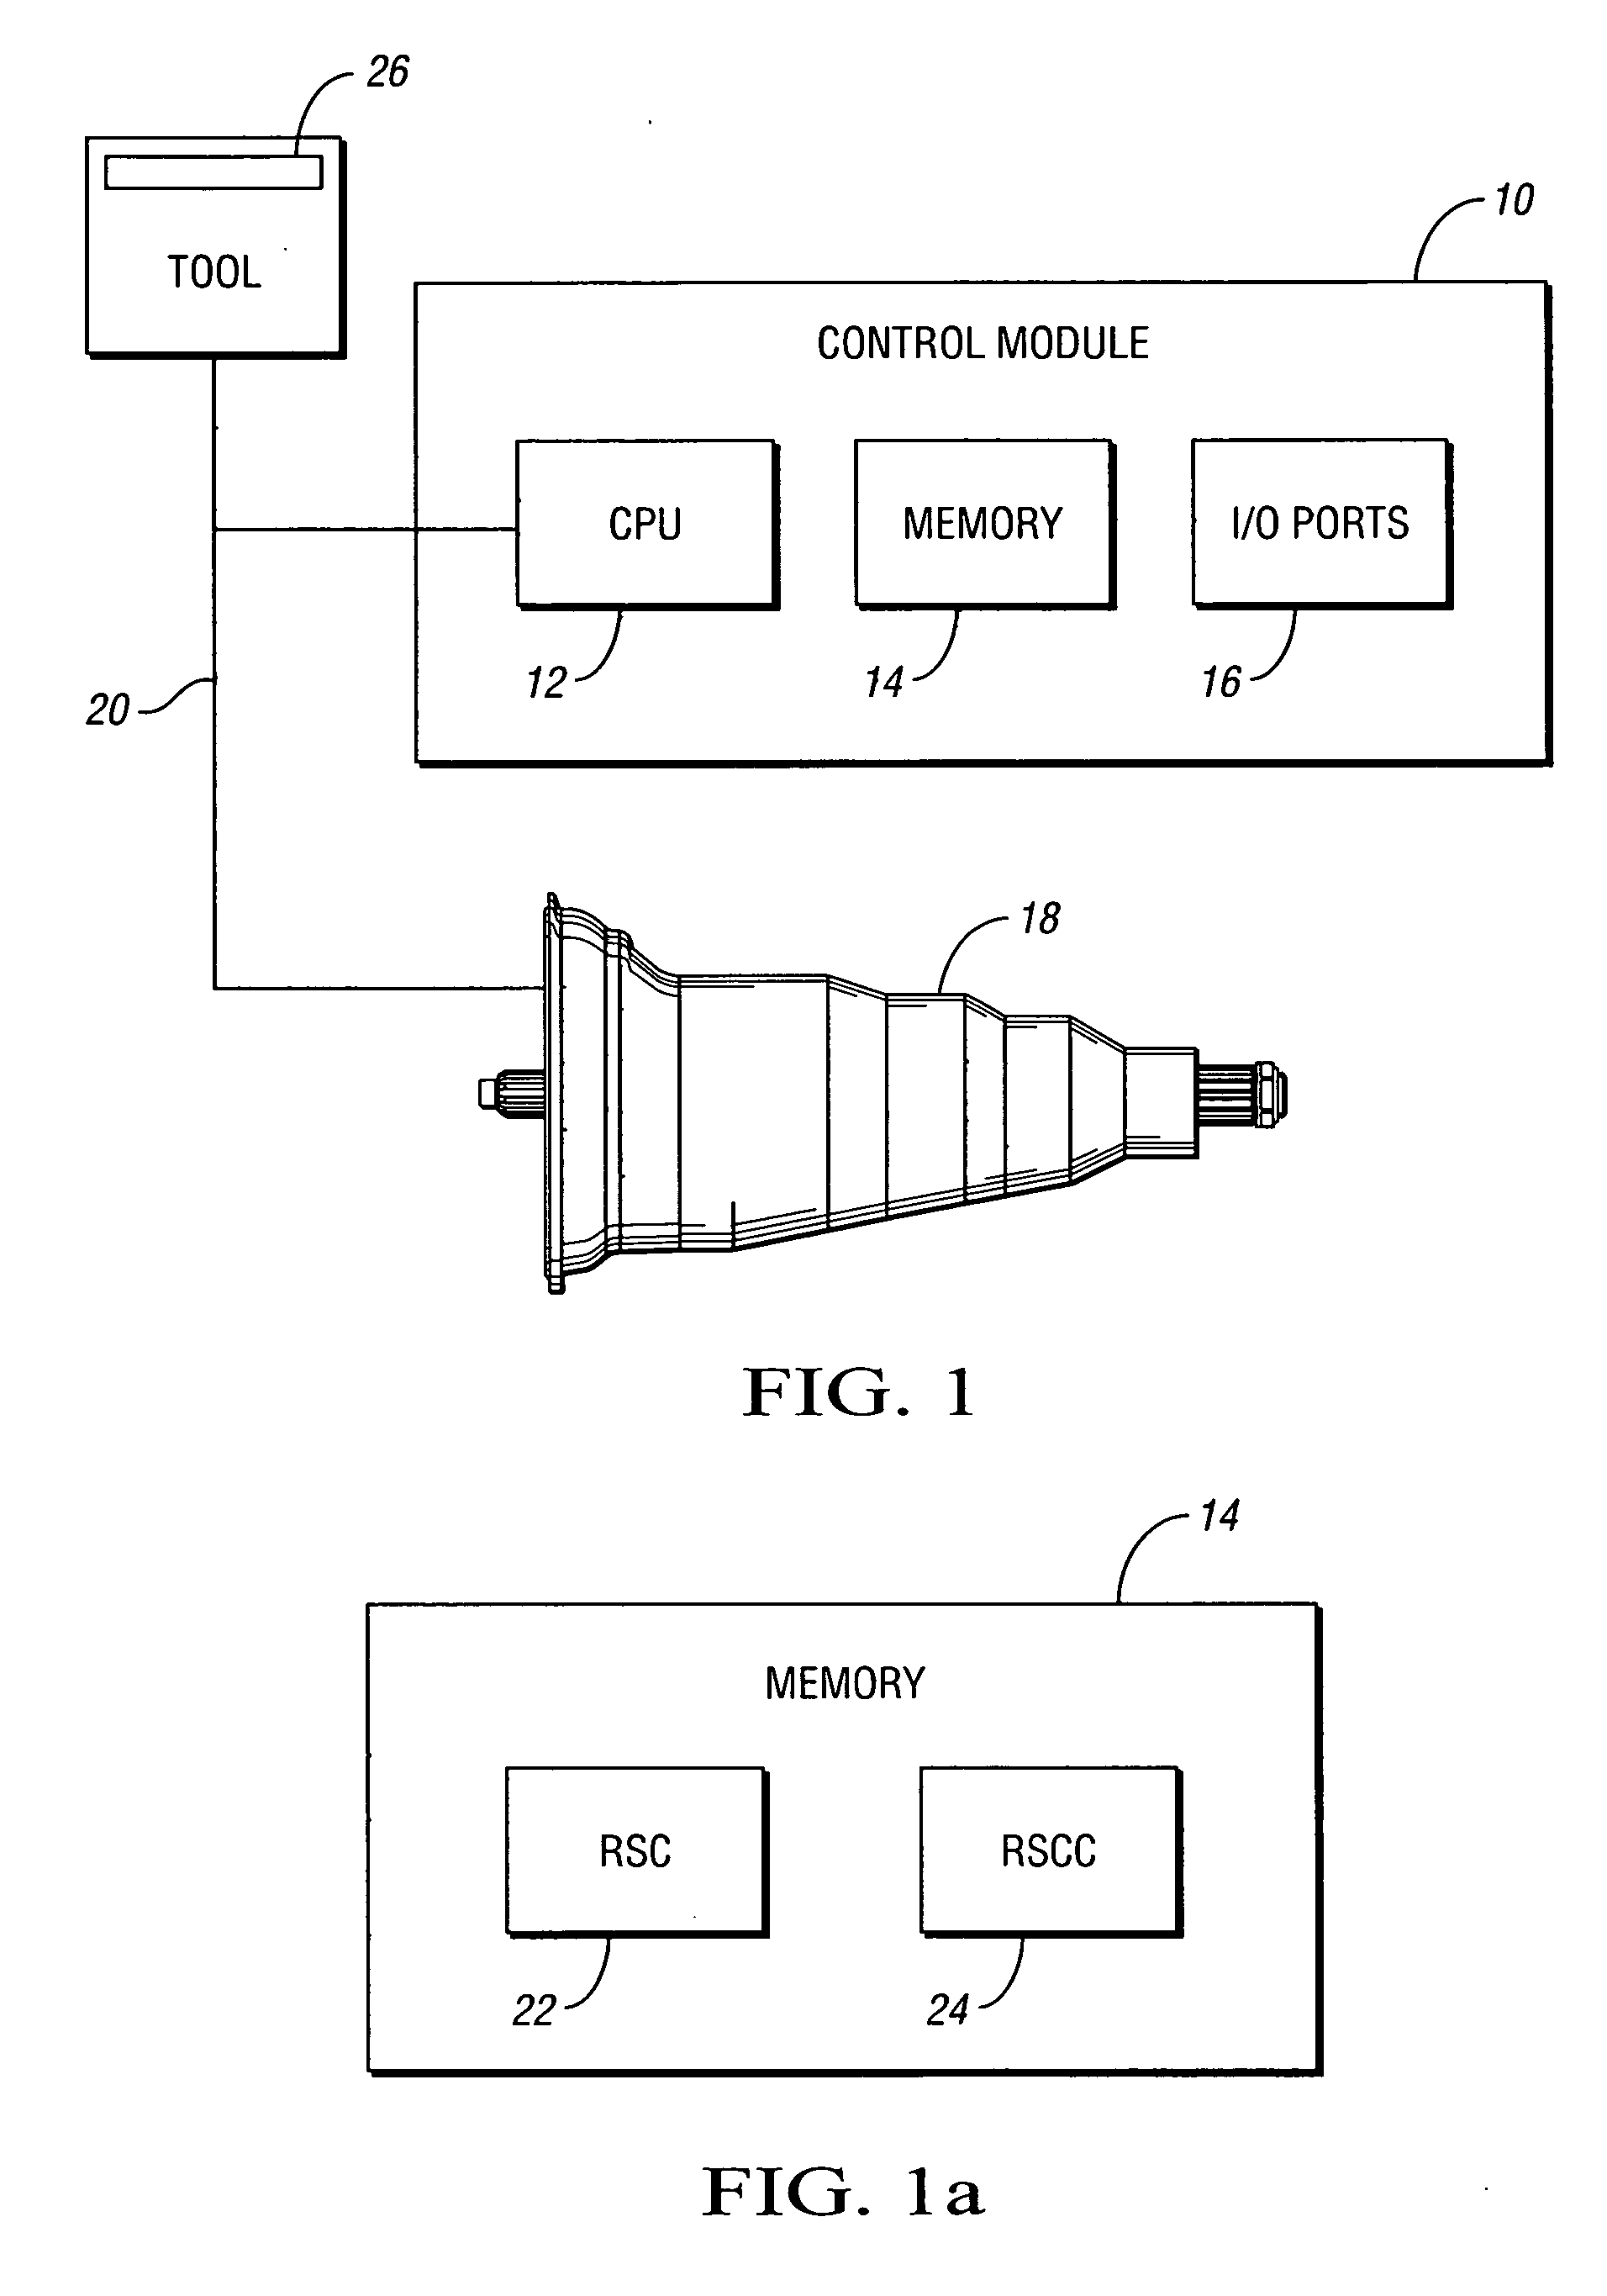 Method for recovering control of a continually resetting control module